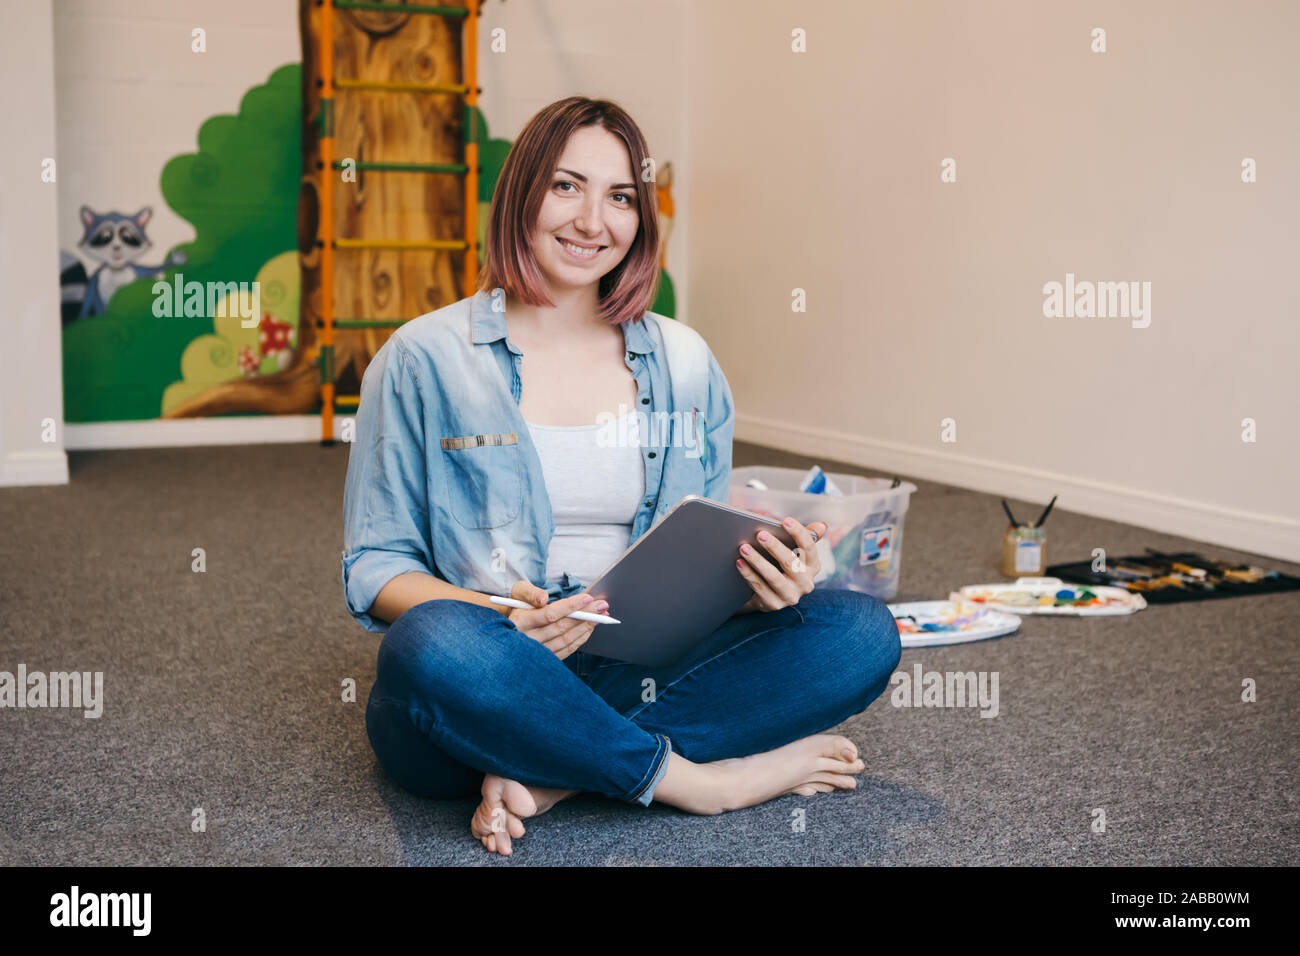 Lifestyle Creative Hobby And Freelance Artistic Work Job Concept Caucasian Woman Artist Illustrator Painting Drawing On Touch Pad Digital Tablet With Stock Photo Alamy